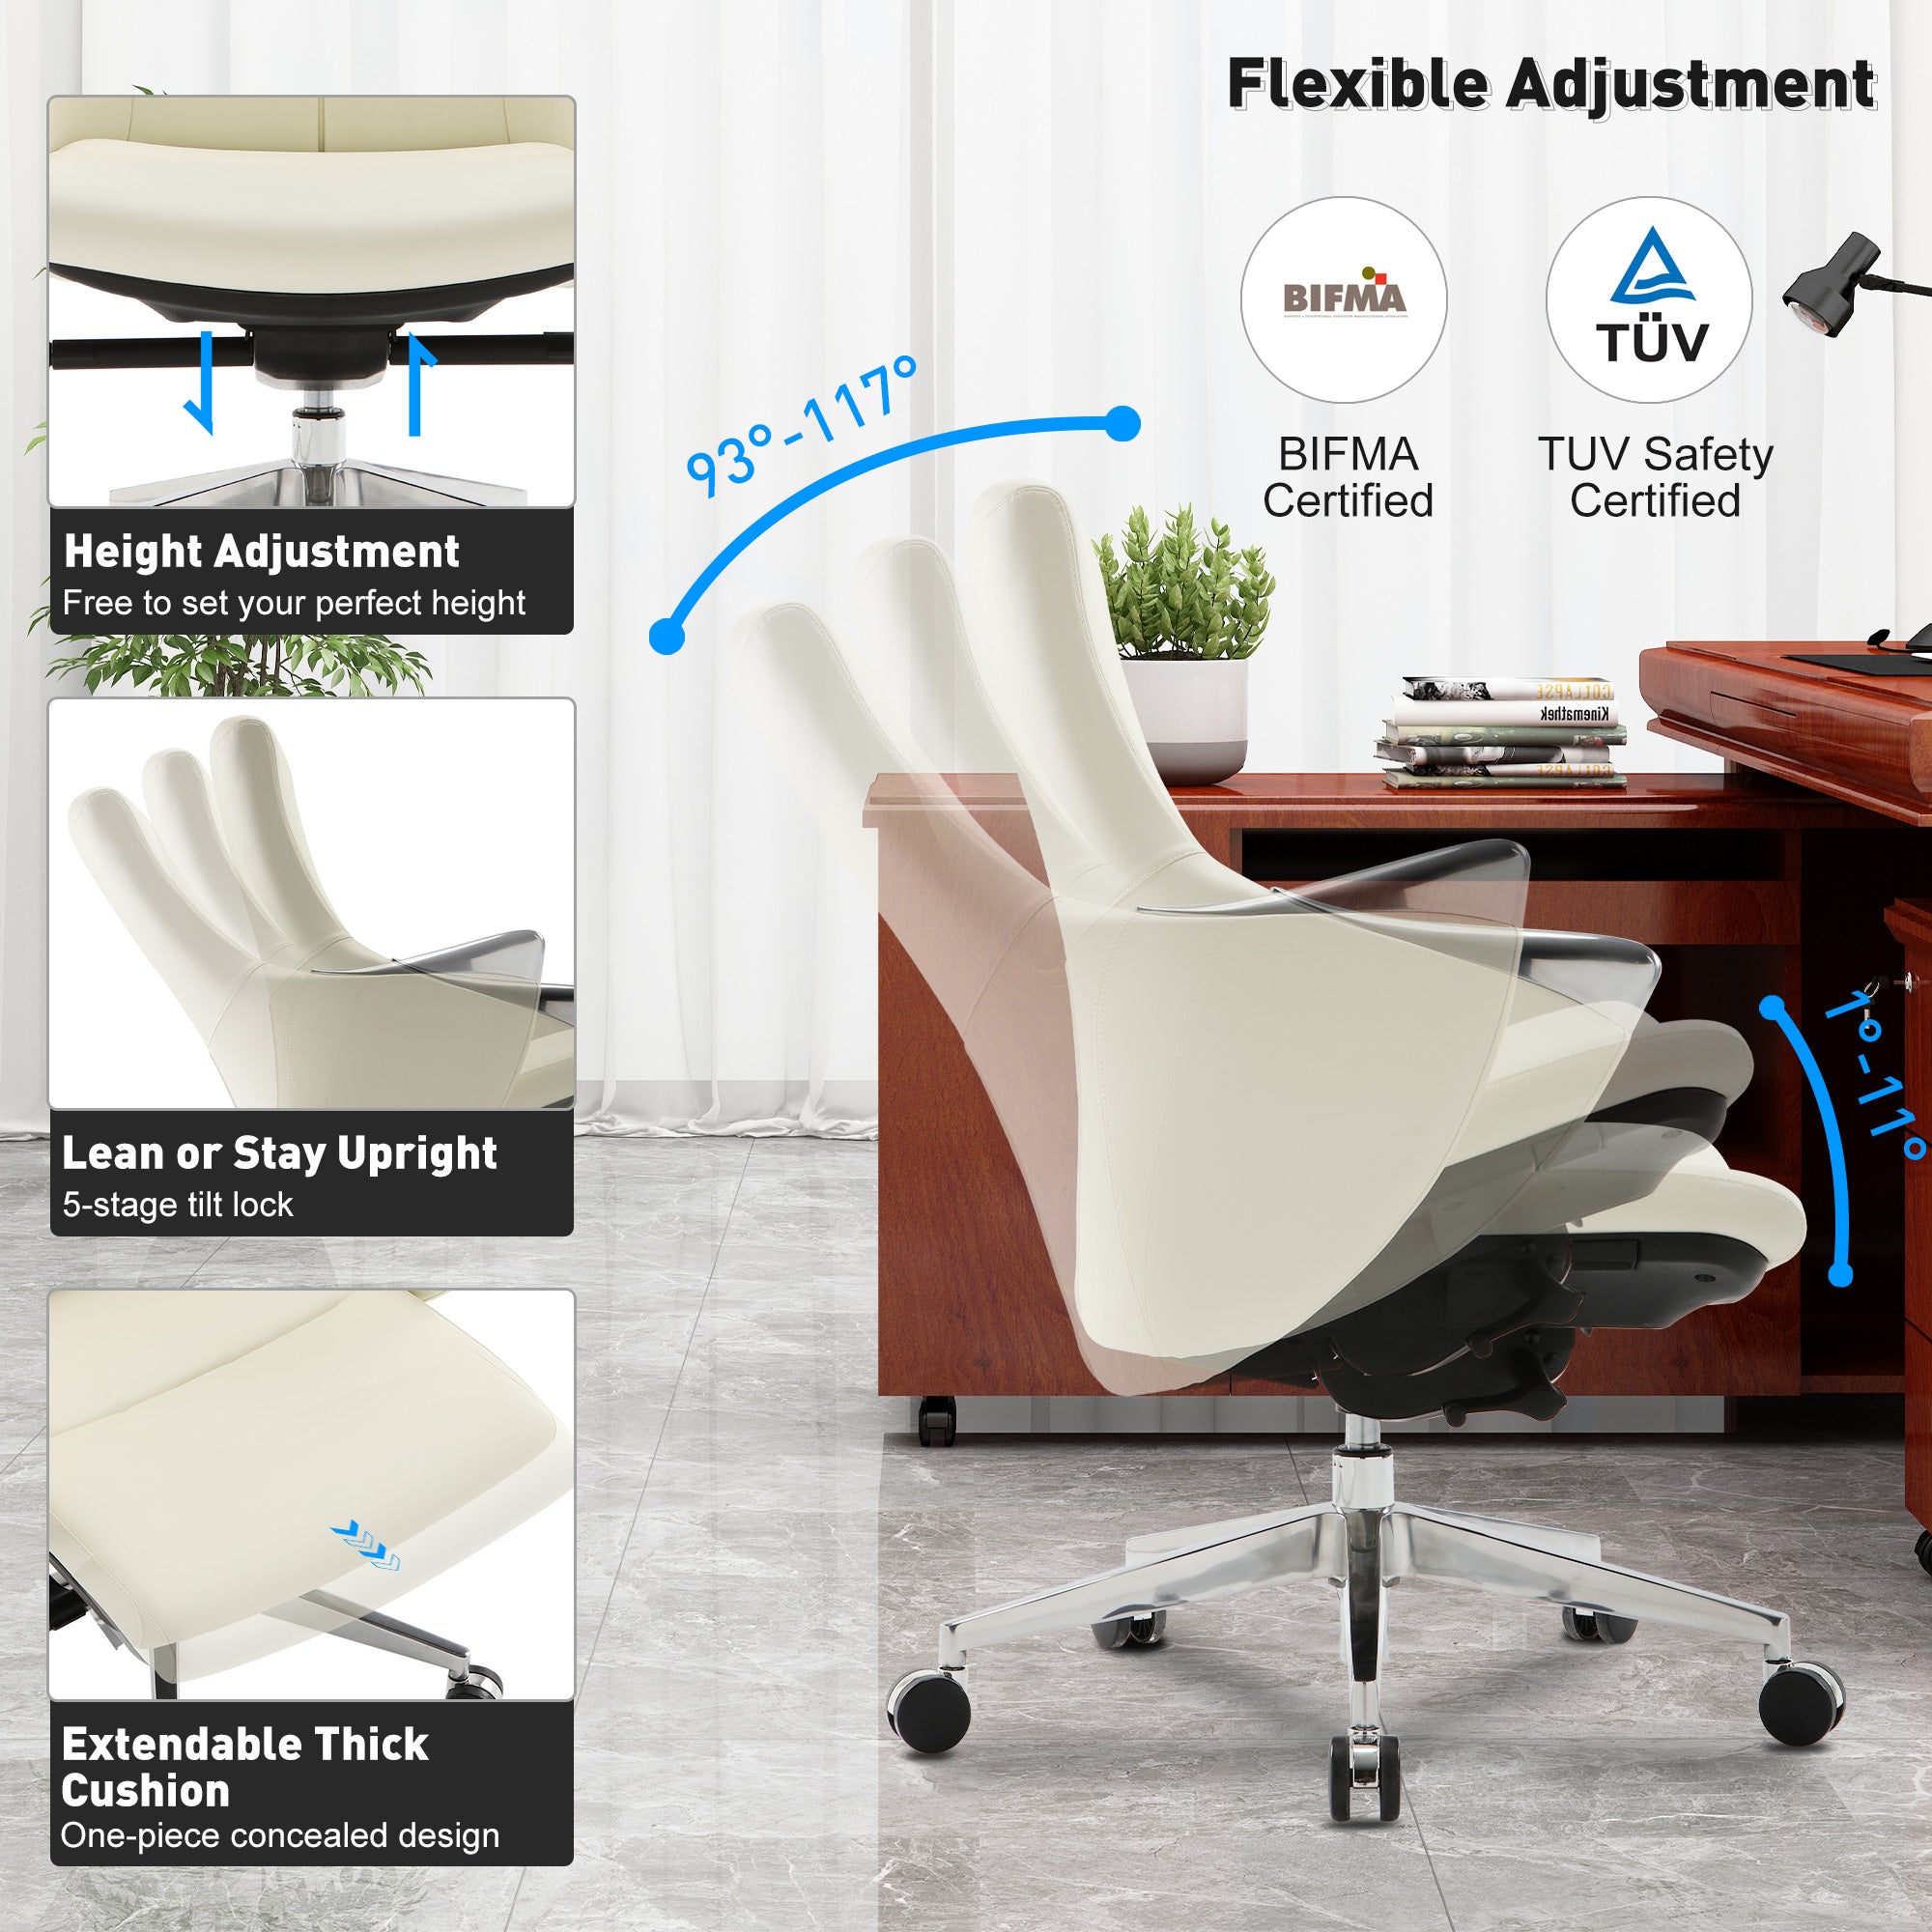 Low Back Executive Chair, Ergonomic Leather Office Chair with Adjustable Height and Tilt Function and 360° Swivel Office Chair,White